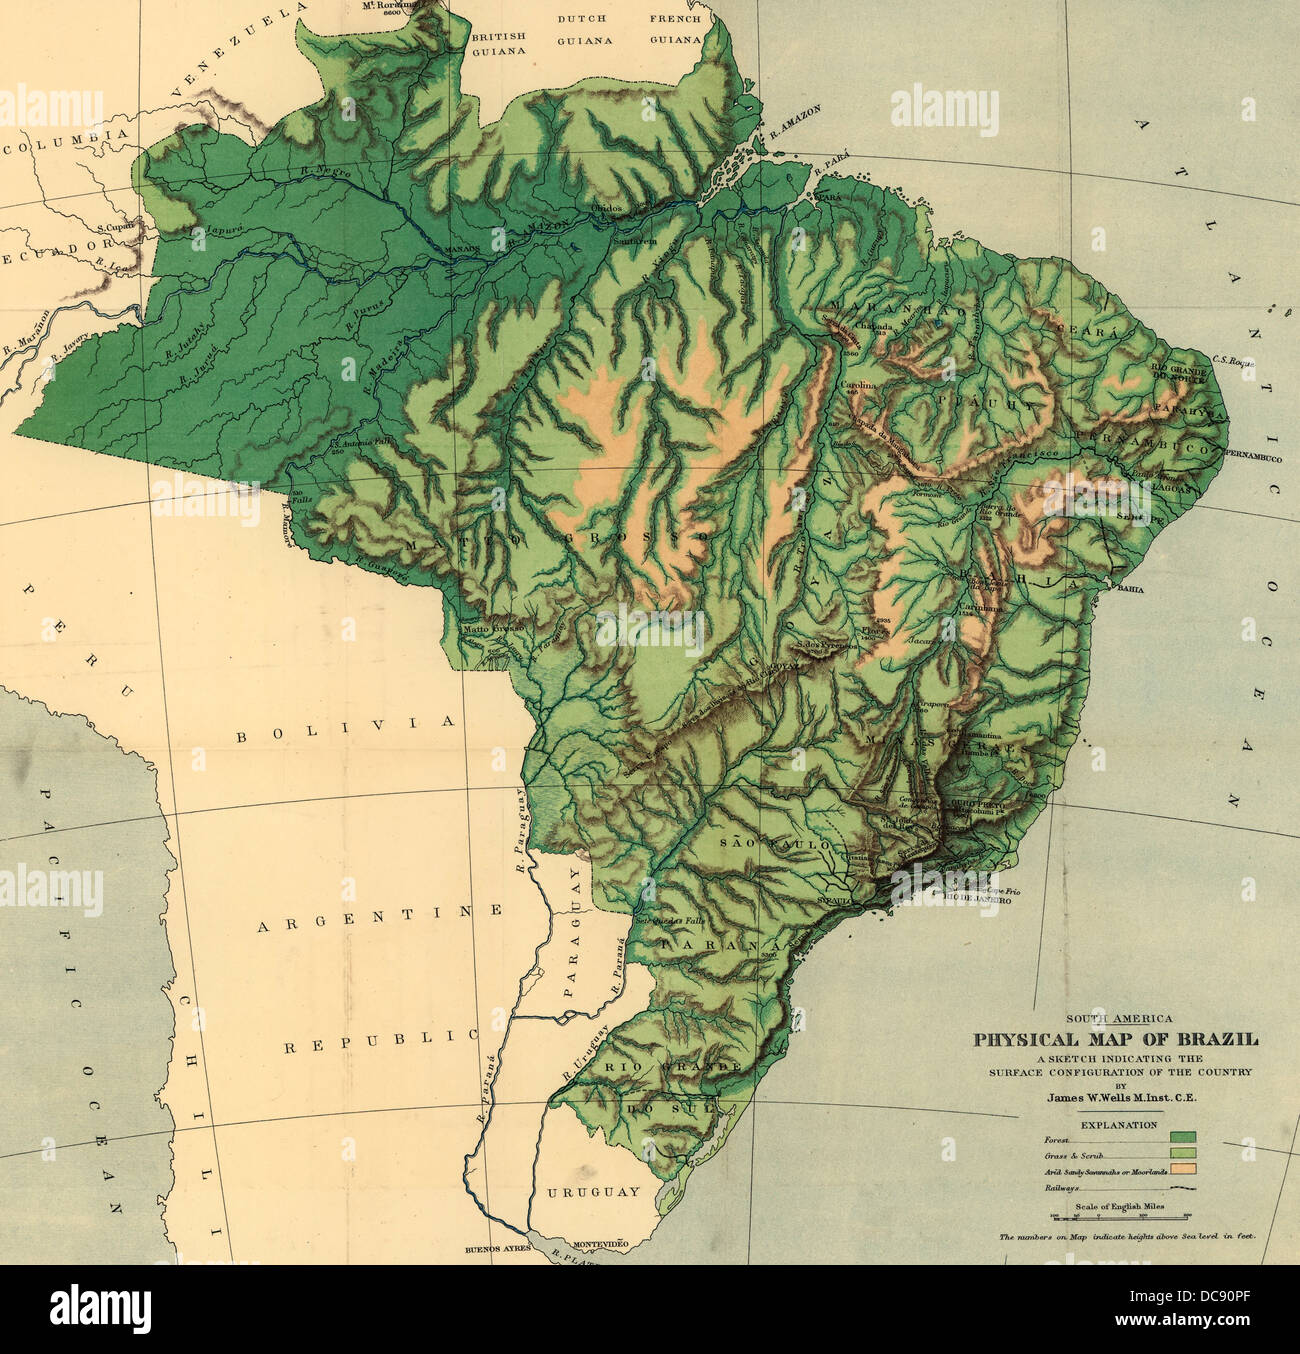 Brazil Map High Resolution Stock Photography and Images - Alamy